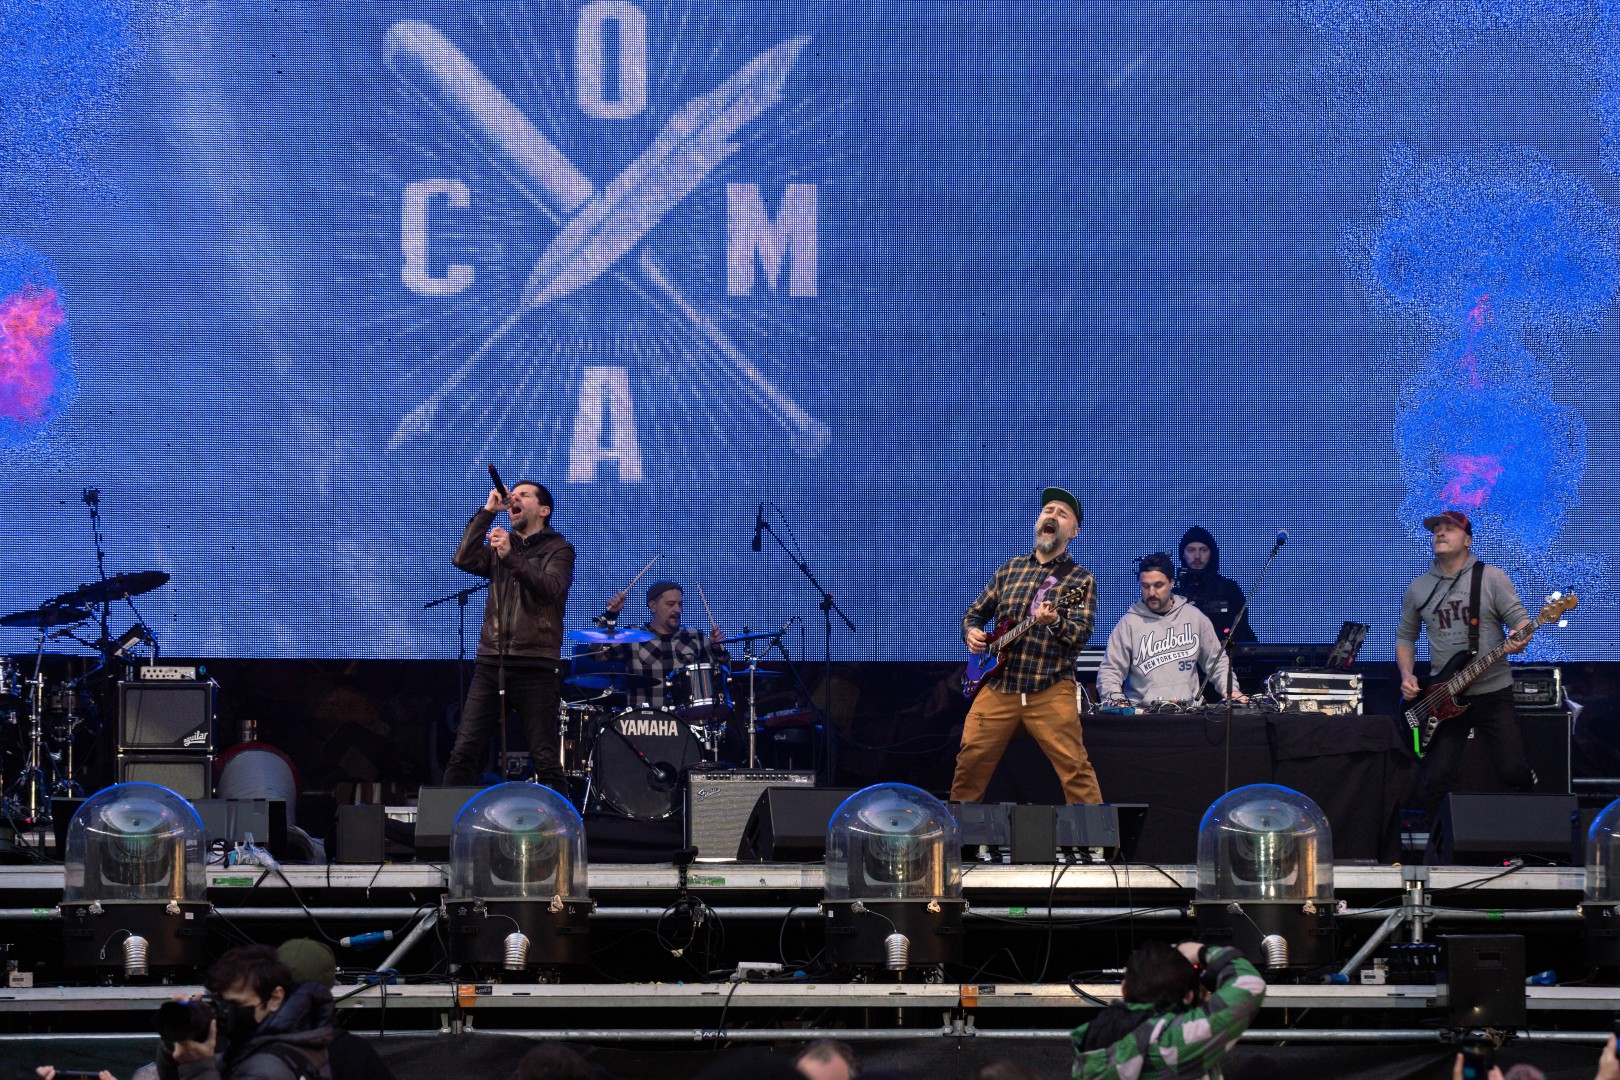 Coma at National Arena in Bucharest on March 12, 2022 (a8461359c3)